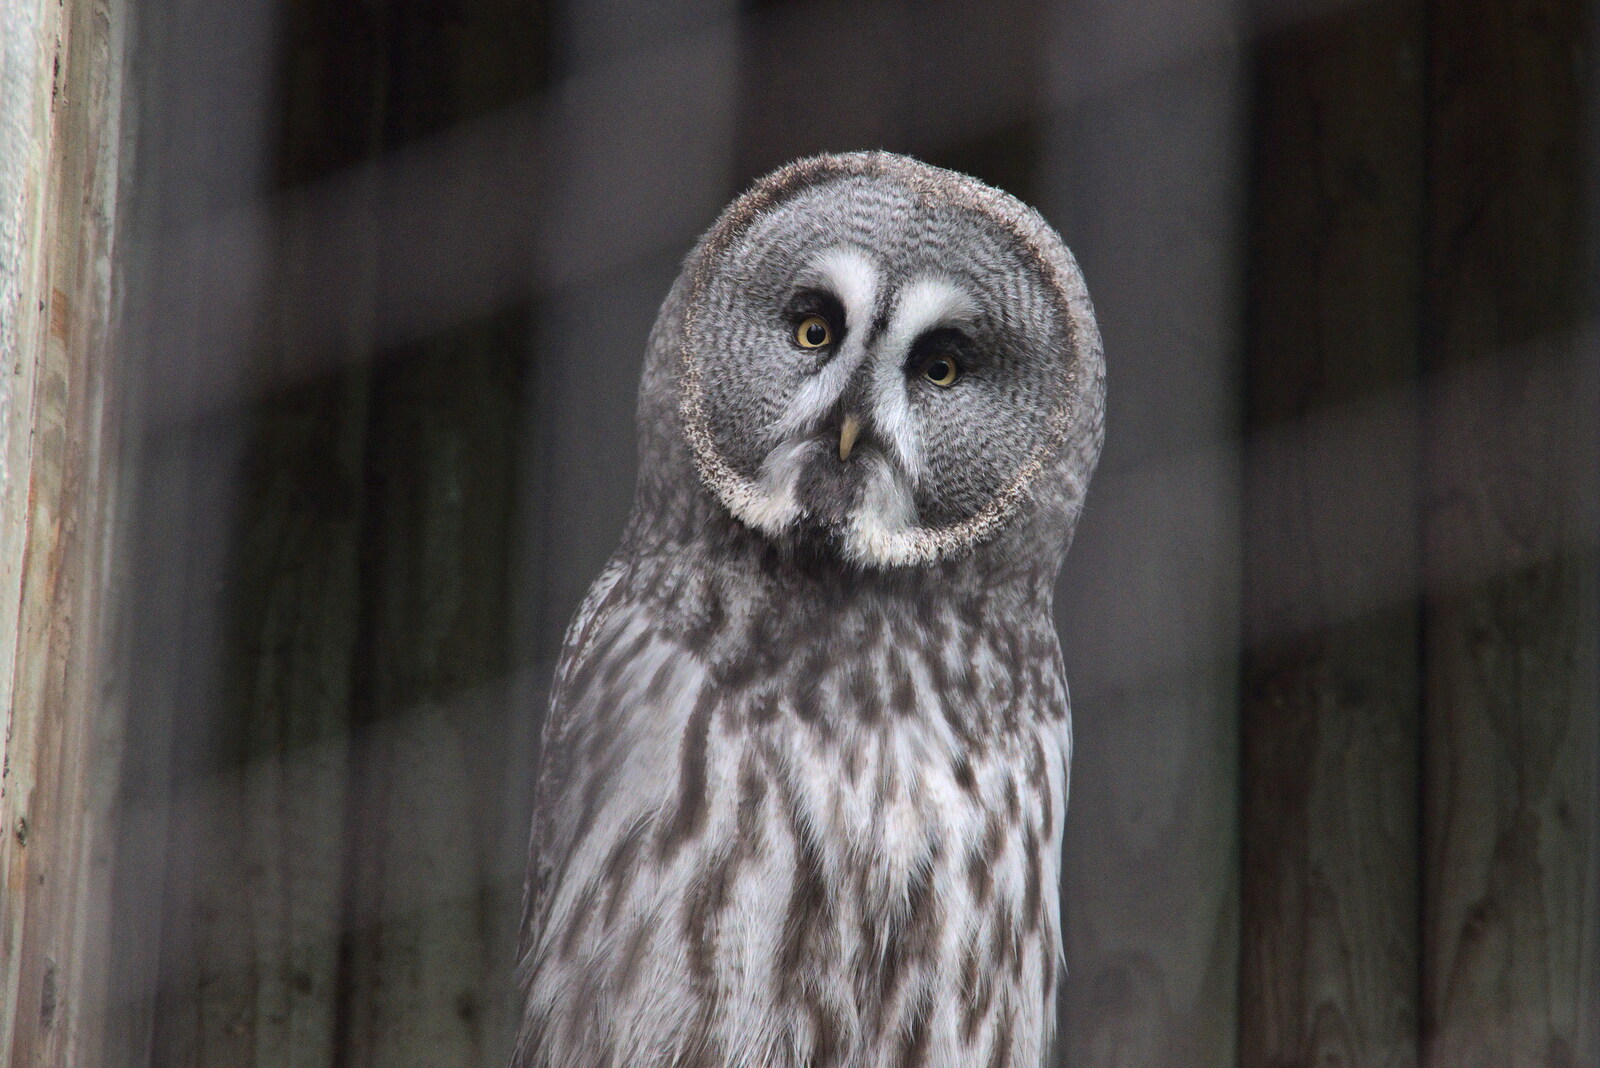 A Few Hours at the Zoo, Banham, Norfolk - 8th January 2023: A Great Grey Owl looks askance